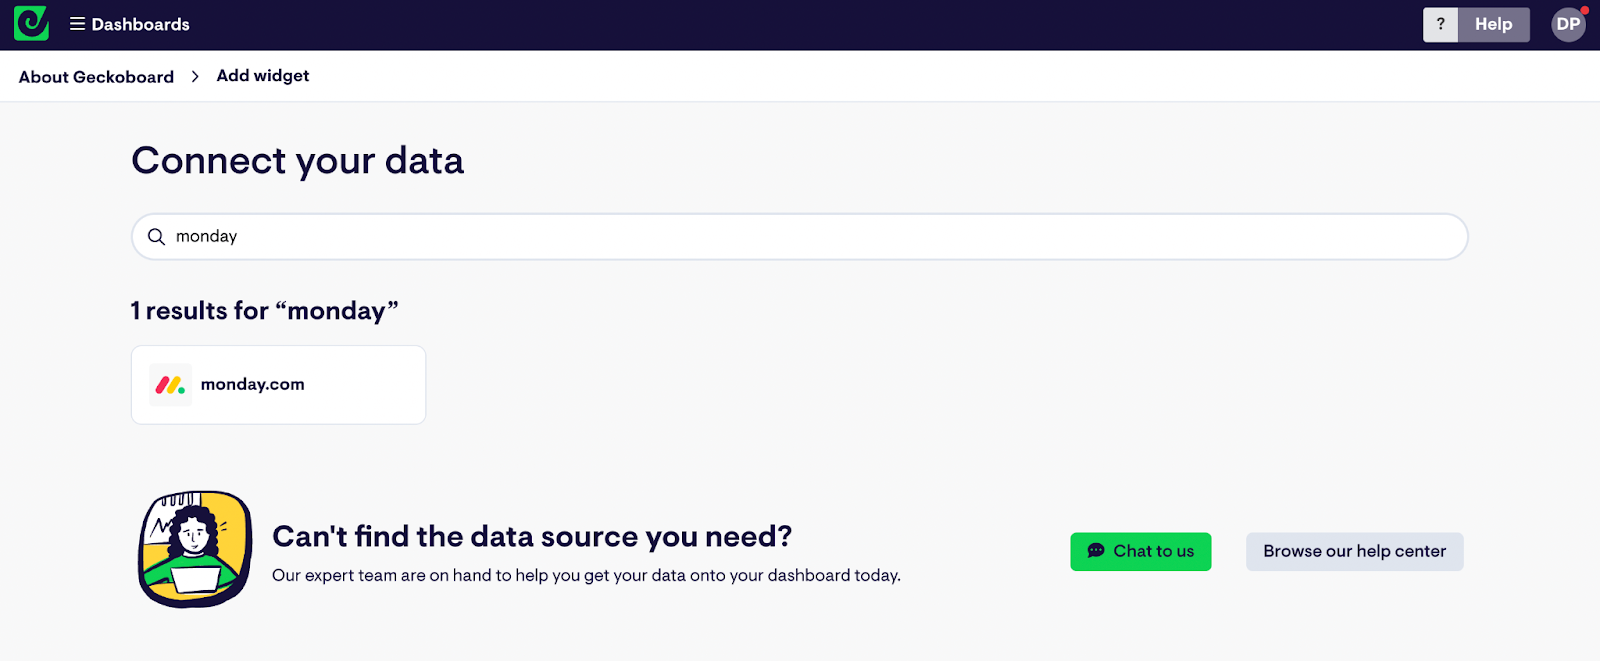 Monday.com data source page on Geckoboard